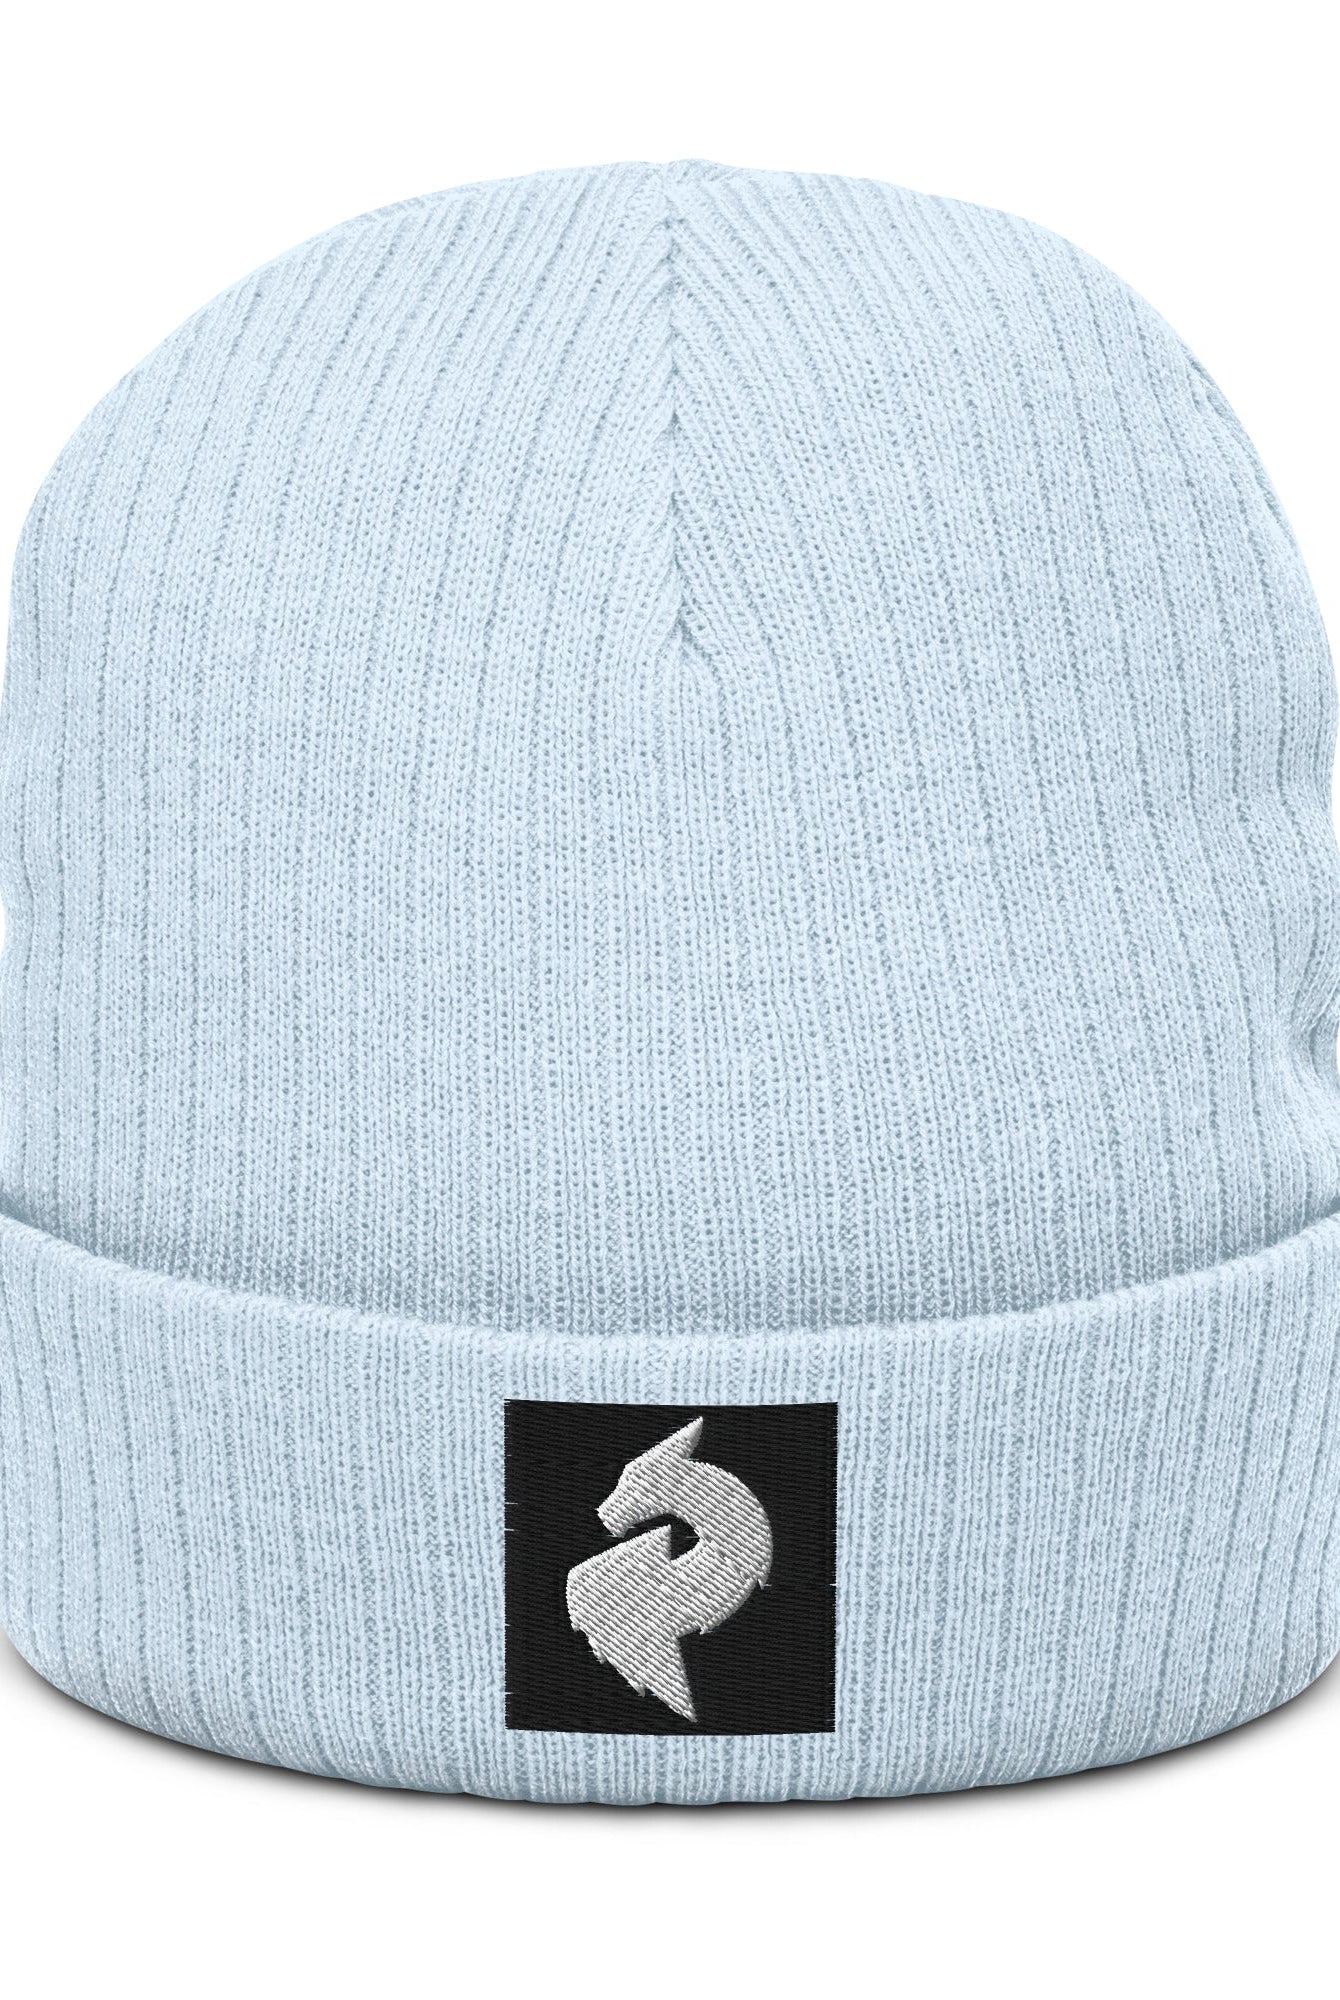 His or Hers Dragon Foxx™ Eco - Ribbed knit beanie - His or Hers Dragon Foxx™ Eco - Ribbed knit beanie - DRAGON FOXX™ - His or Hers Dragon Foxx™ Eco - Ribbed knit beanie - 2867494_15019 - Light Blue - - Accessories - Acid Green Eco - Ribbed knit beanie - Beanie